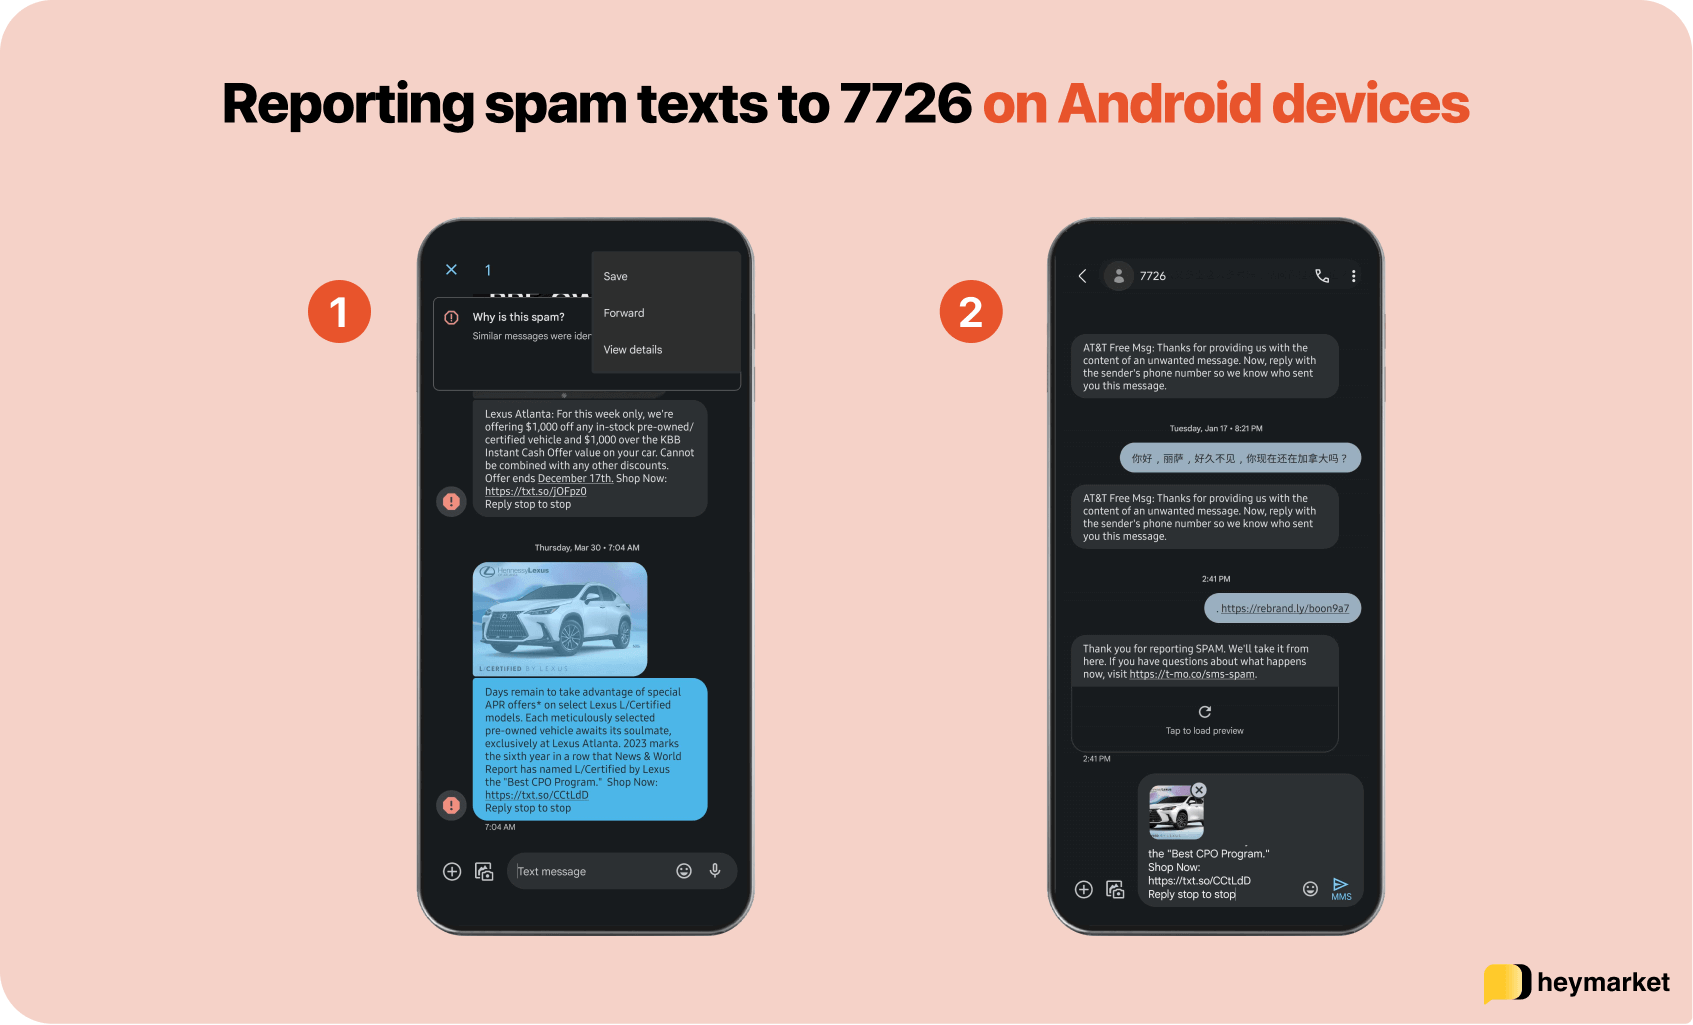 Steps for reporting spam texts on Android